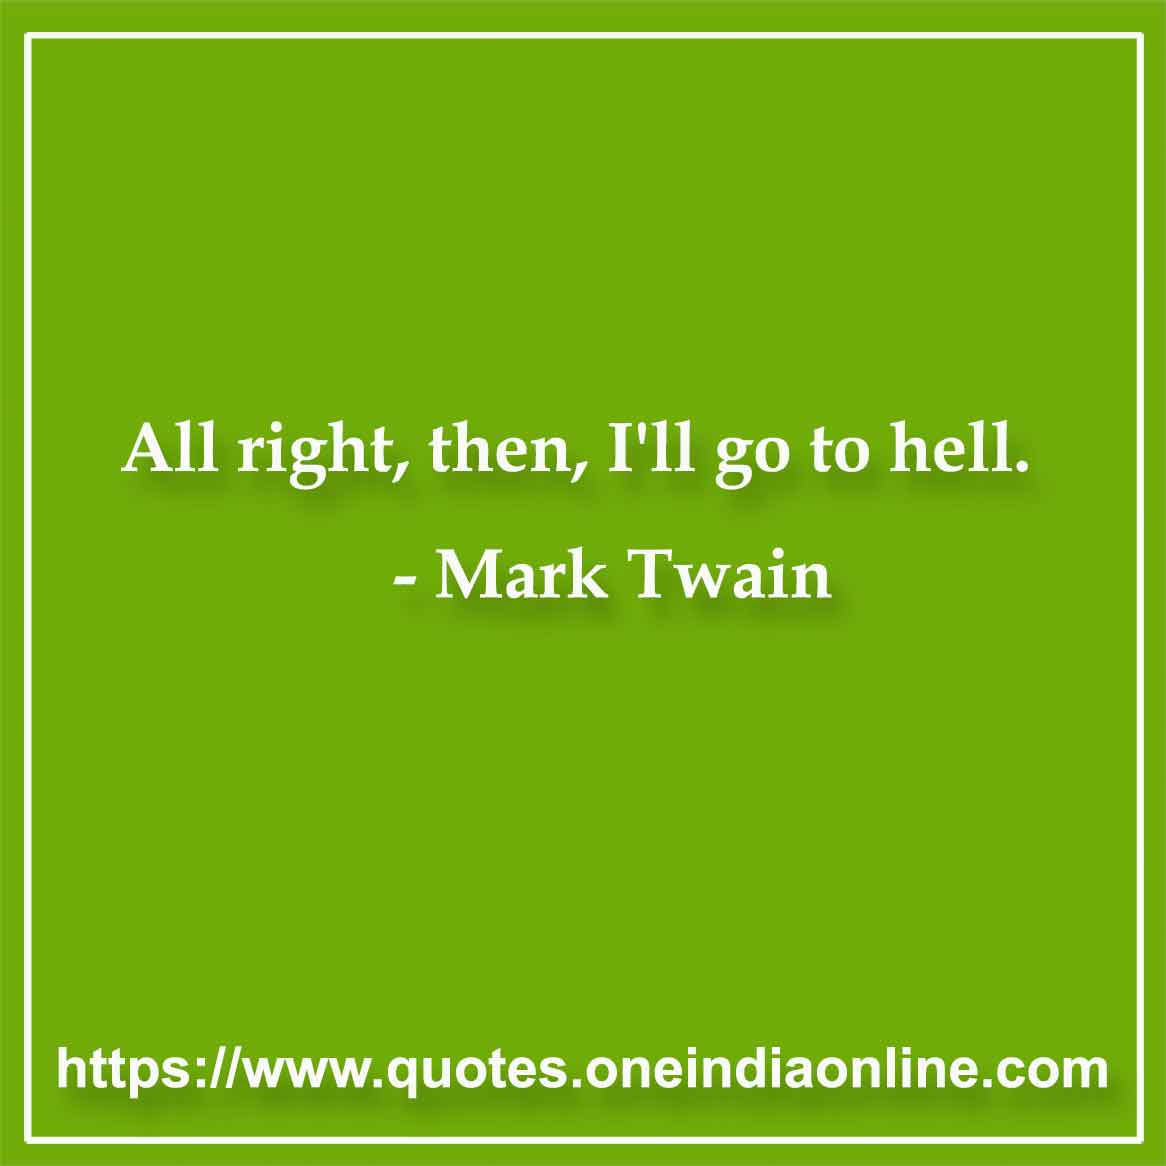 All right, then, I'll go to hell.

- Mark Twain Quotes